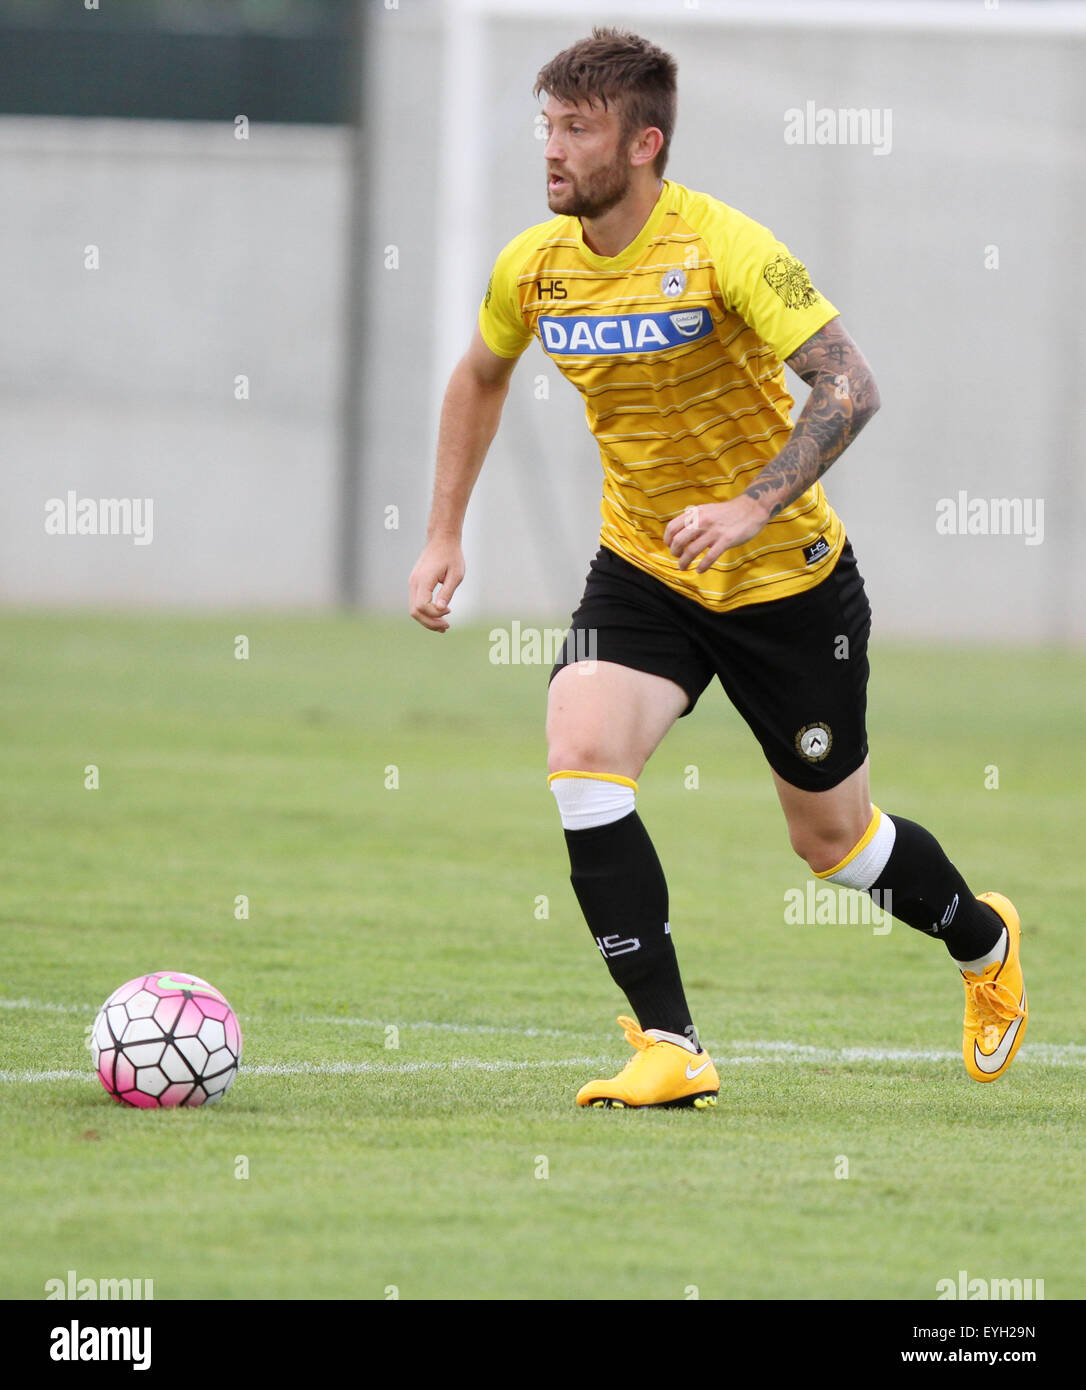 Udine, Italy. 29th July, 2015. Udinese's defender Sergio Piccoli Neuton during the friendly pre-season football match Udinese Calcio v Clodiense on 29th July, 2015 at Bruseschi training center in Udine, Italy. Credit:  Andrea Spinelli/Alamy Live News Stock Photo